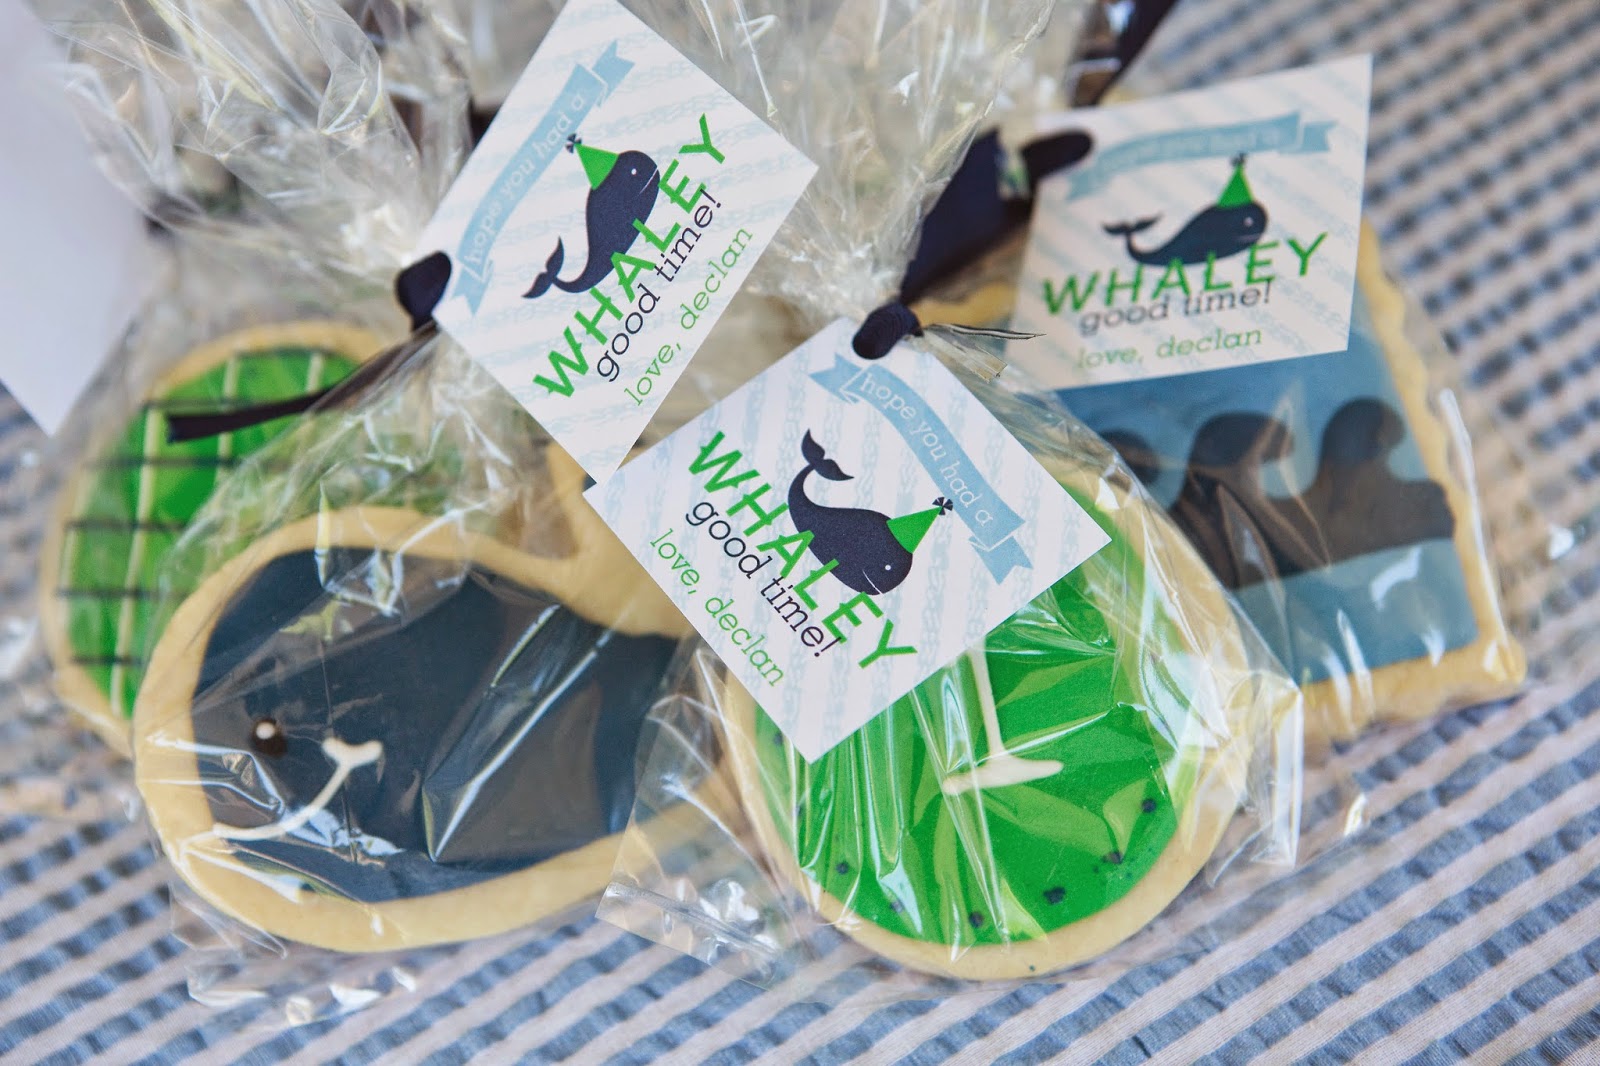 Whale Birthday Party Cookie Favors